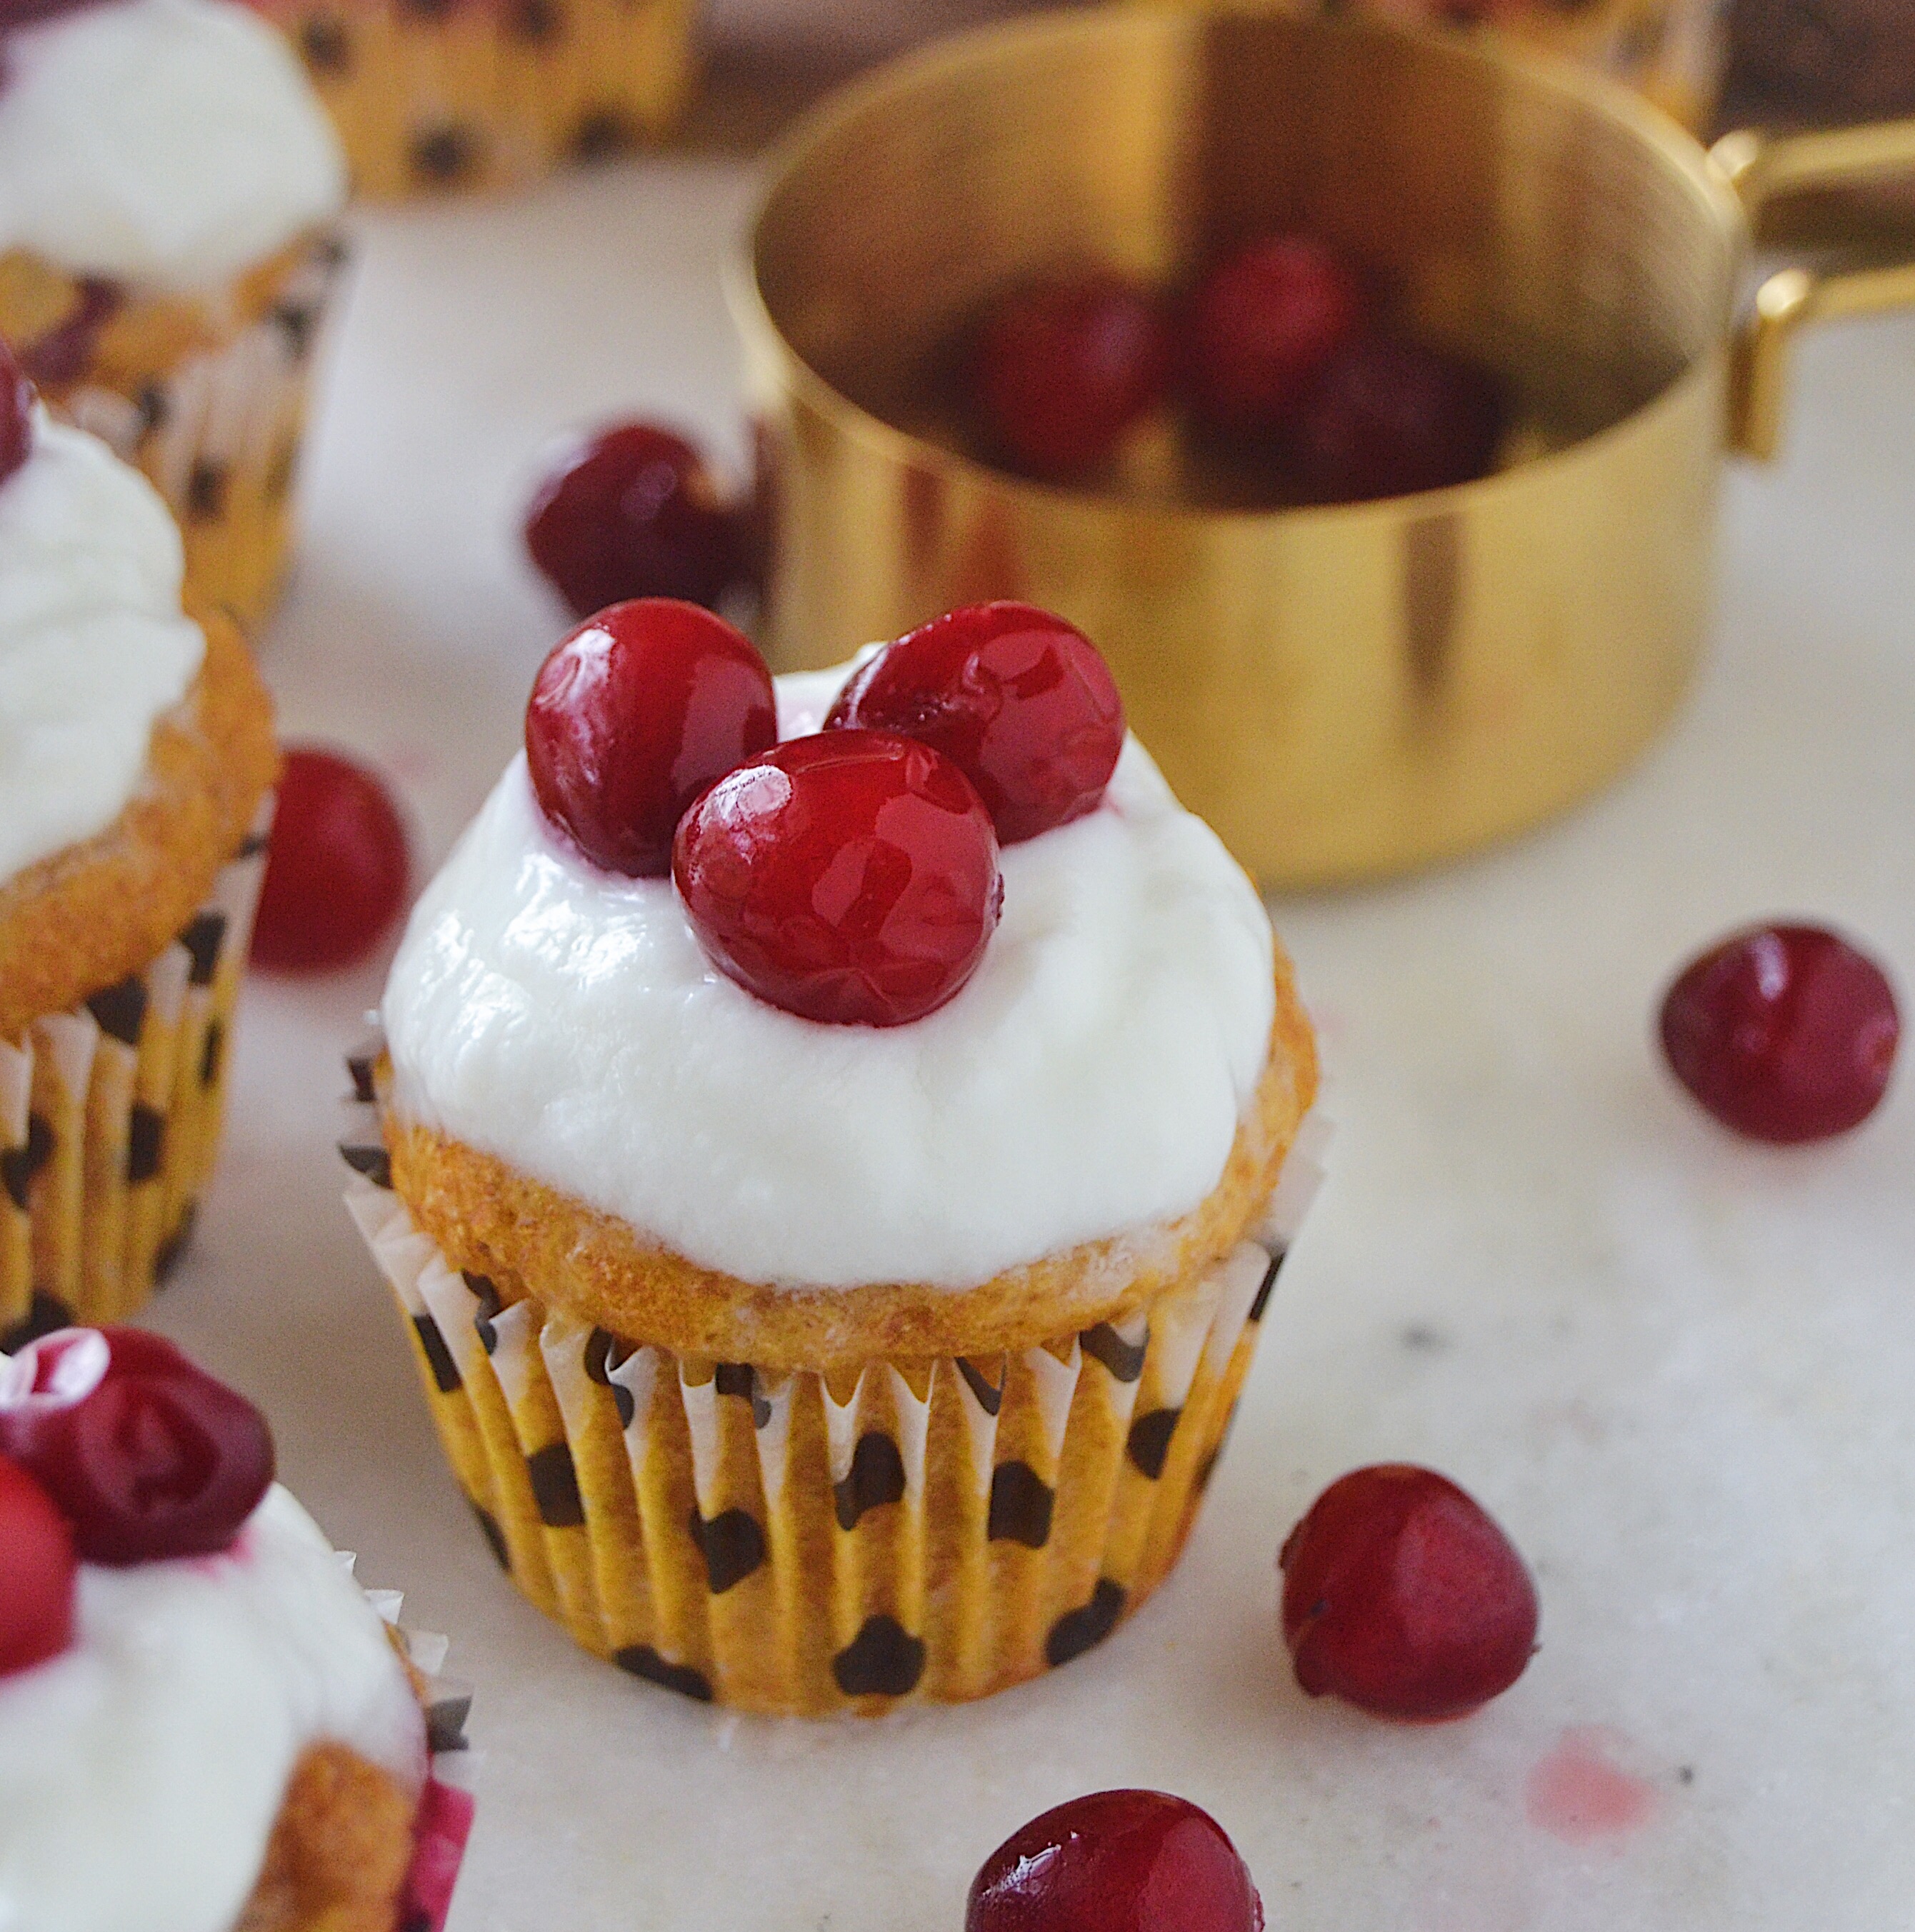 New Year's dog treat recipe for Sweet Potato and Cranberry Pupcakes